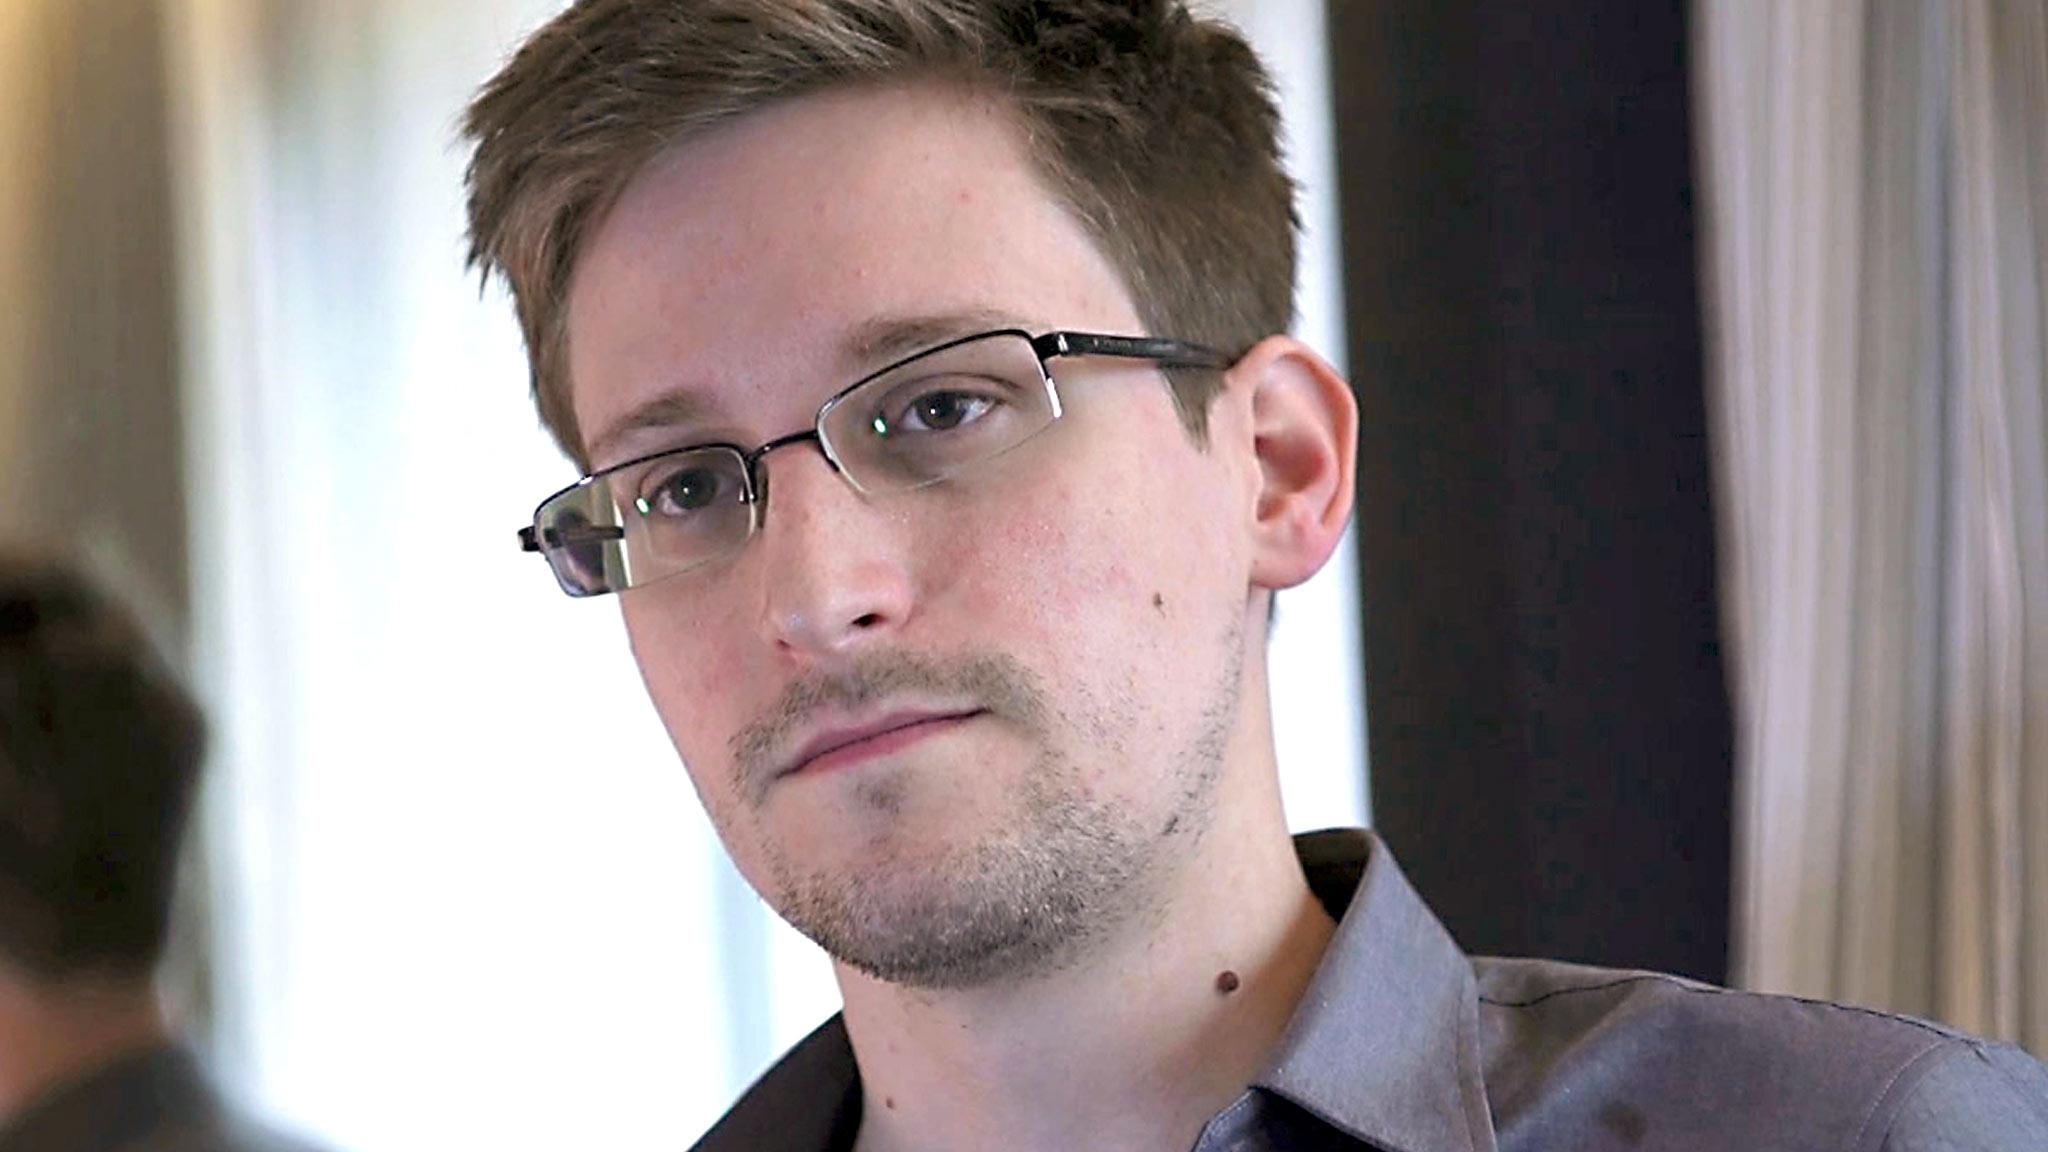 Edward Snowden Exclusive. The Deep State & Revolution we need